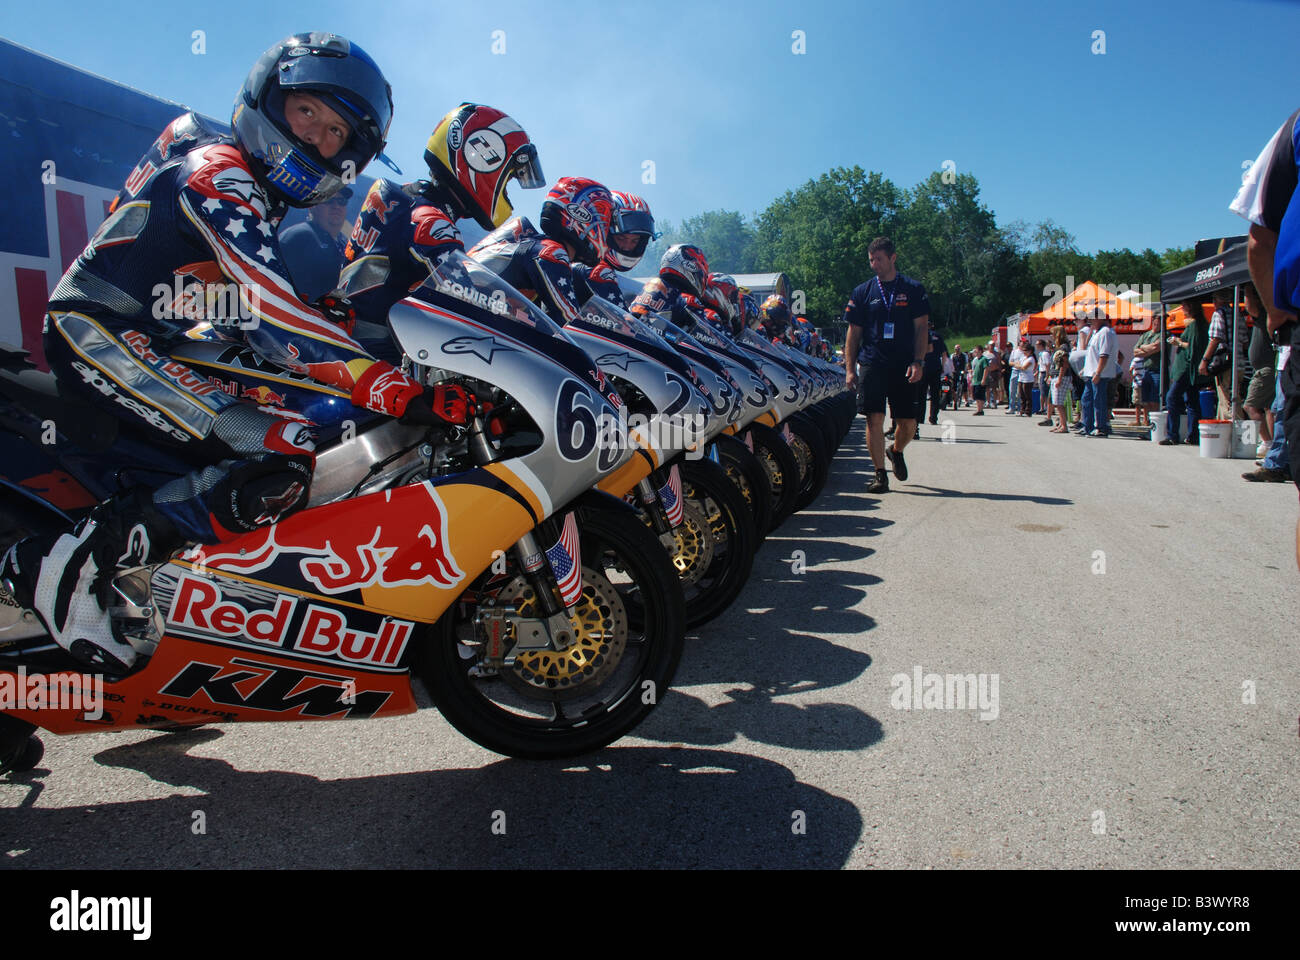 Red Bull Rookie Cup riders are lined up ready for qualifying. Stock Photo